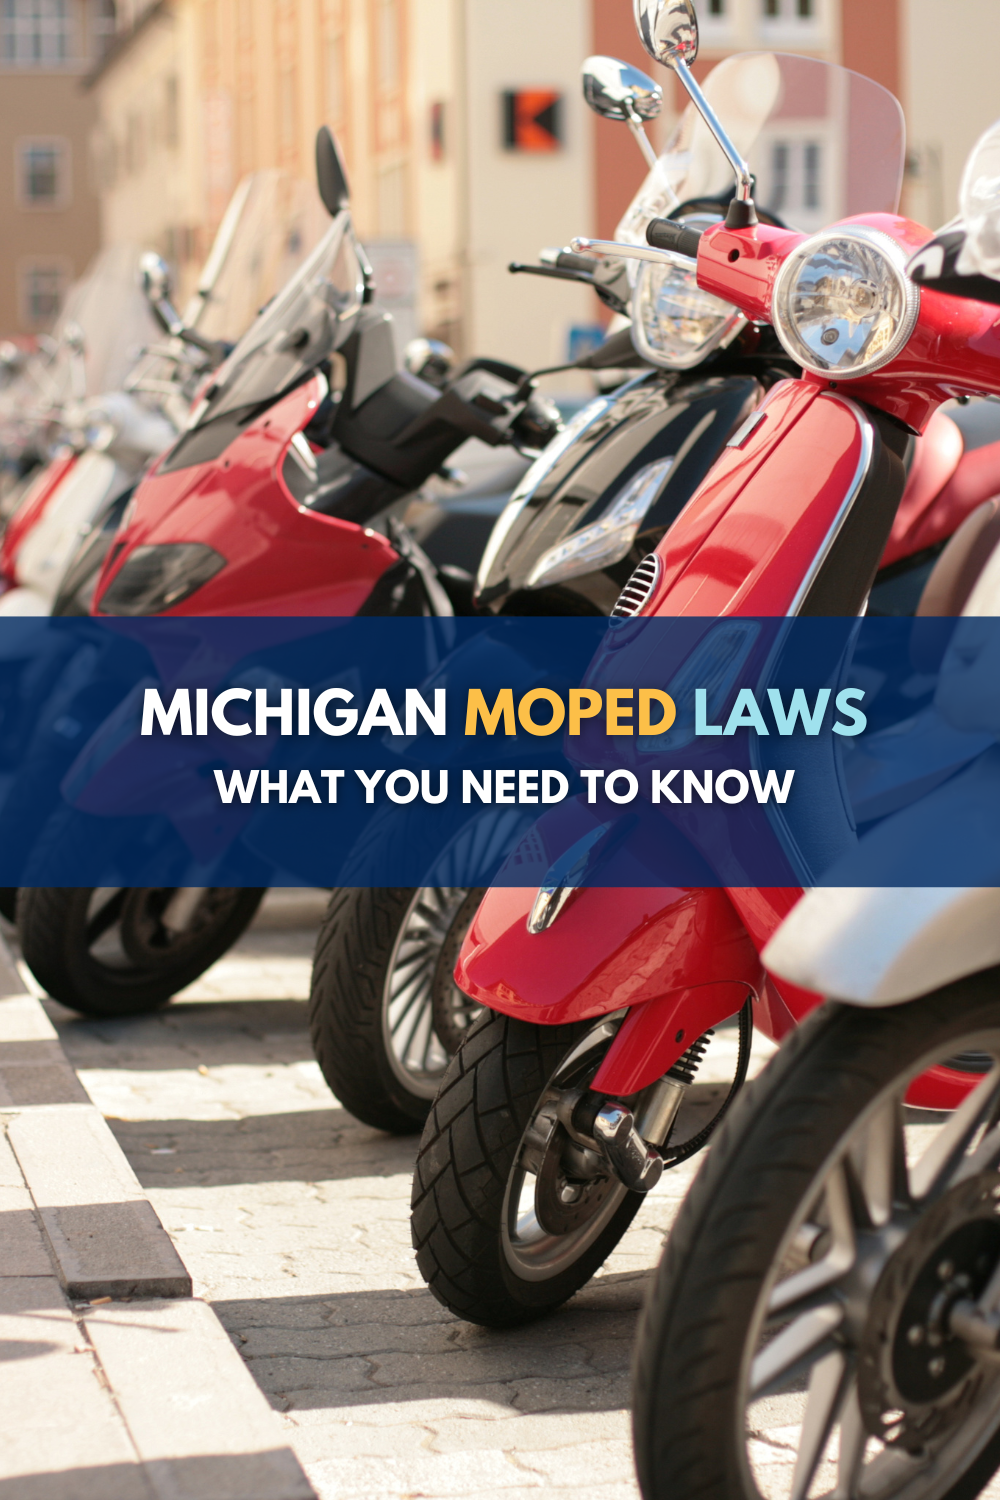 Michigan Moped Laws: What You Need To Know